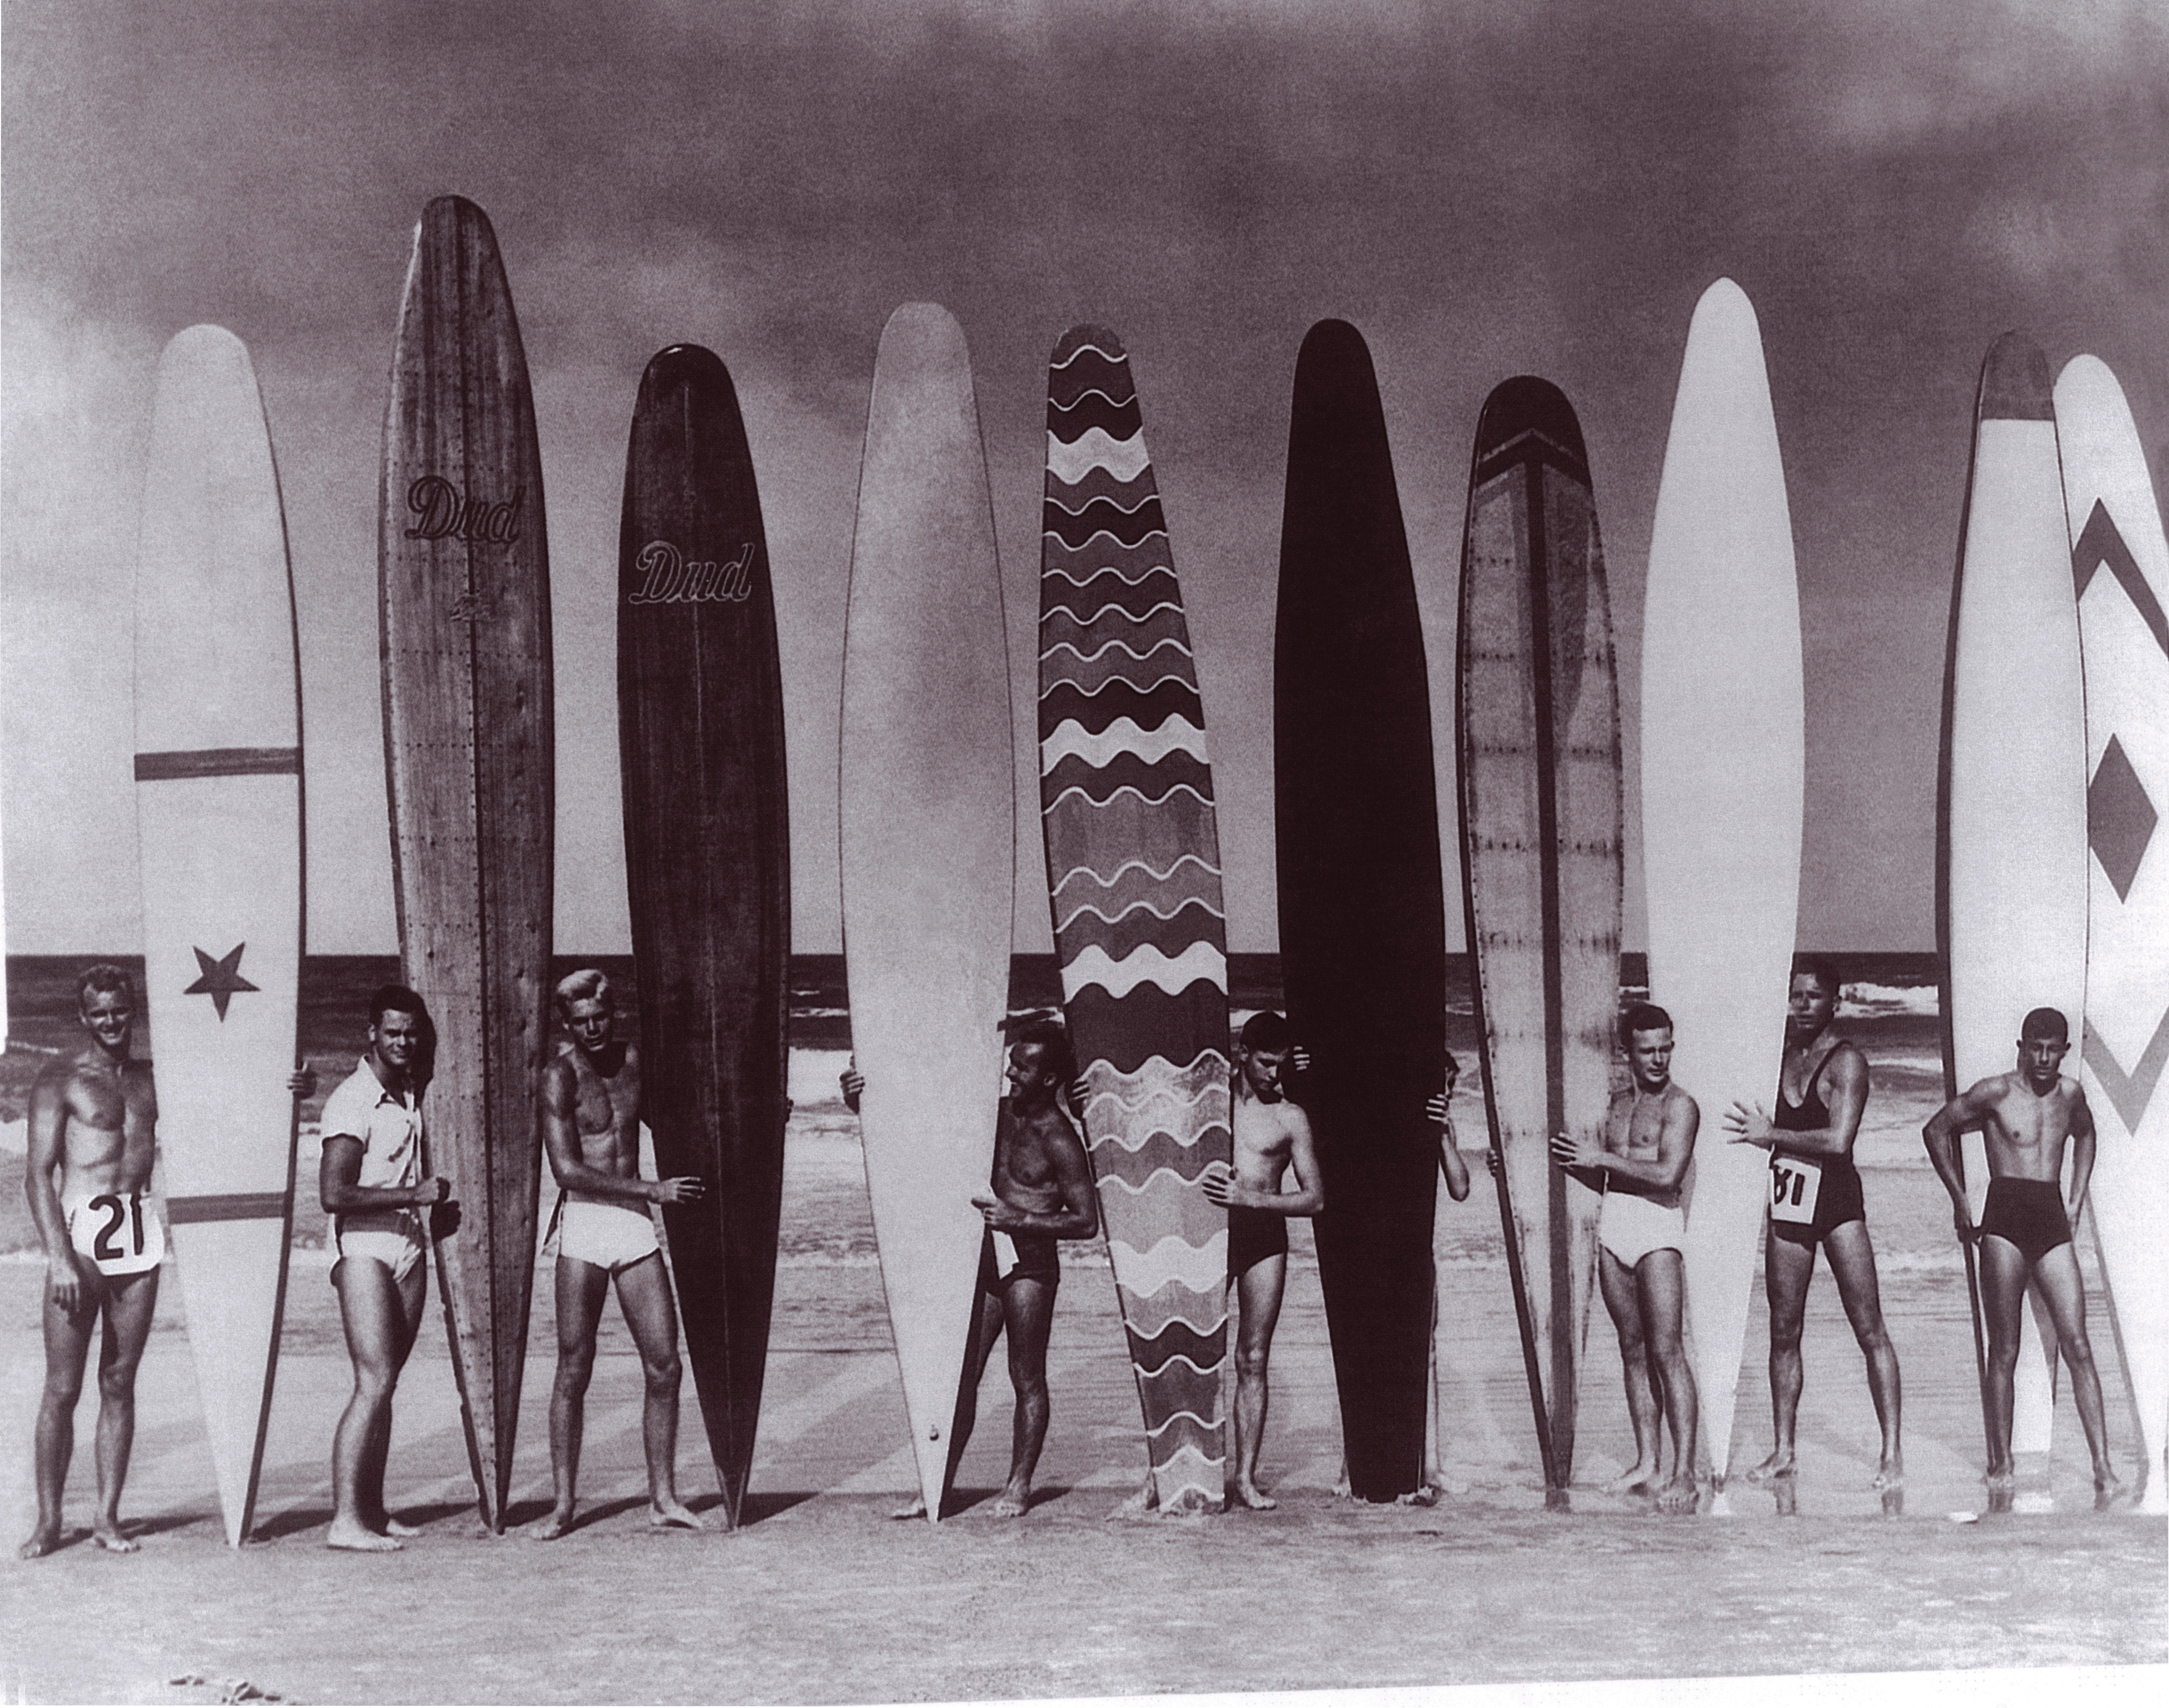 Black and white image of Stanley Whitman and his brothers Bill and Dudley with other surfers at Daytona Beach circa 1934